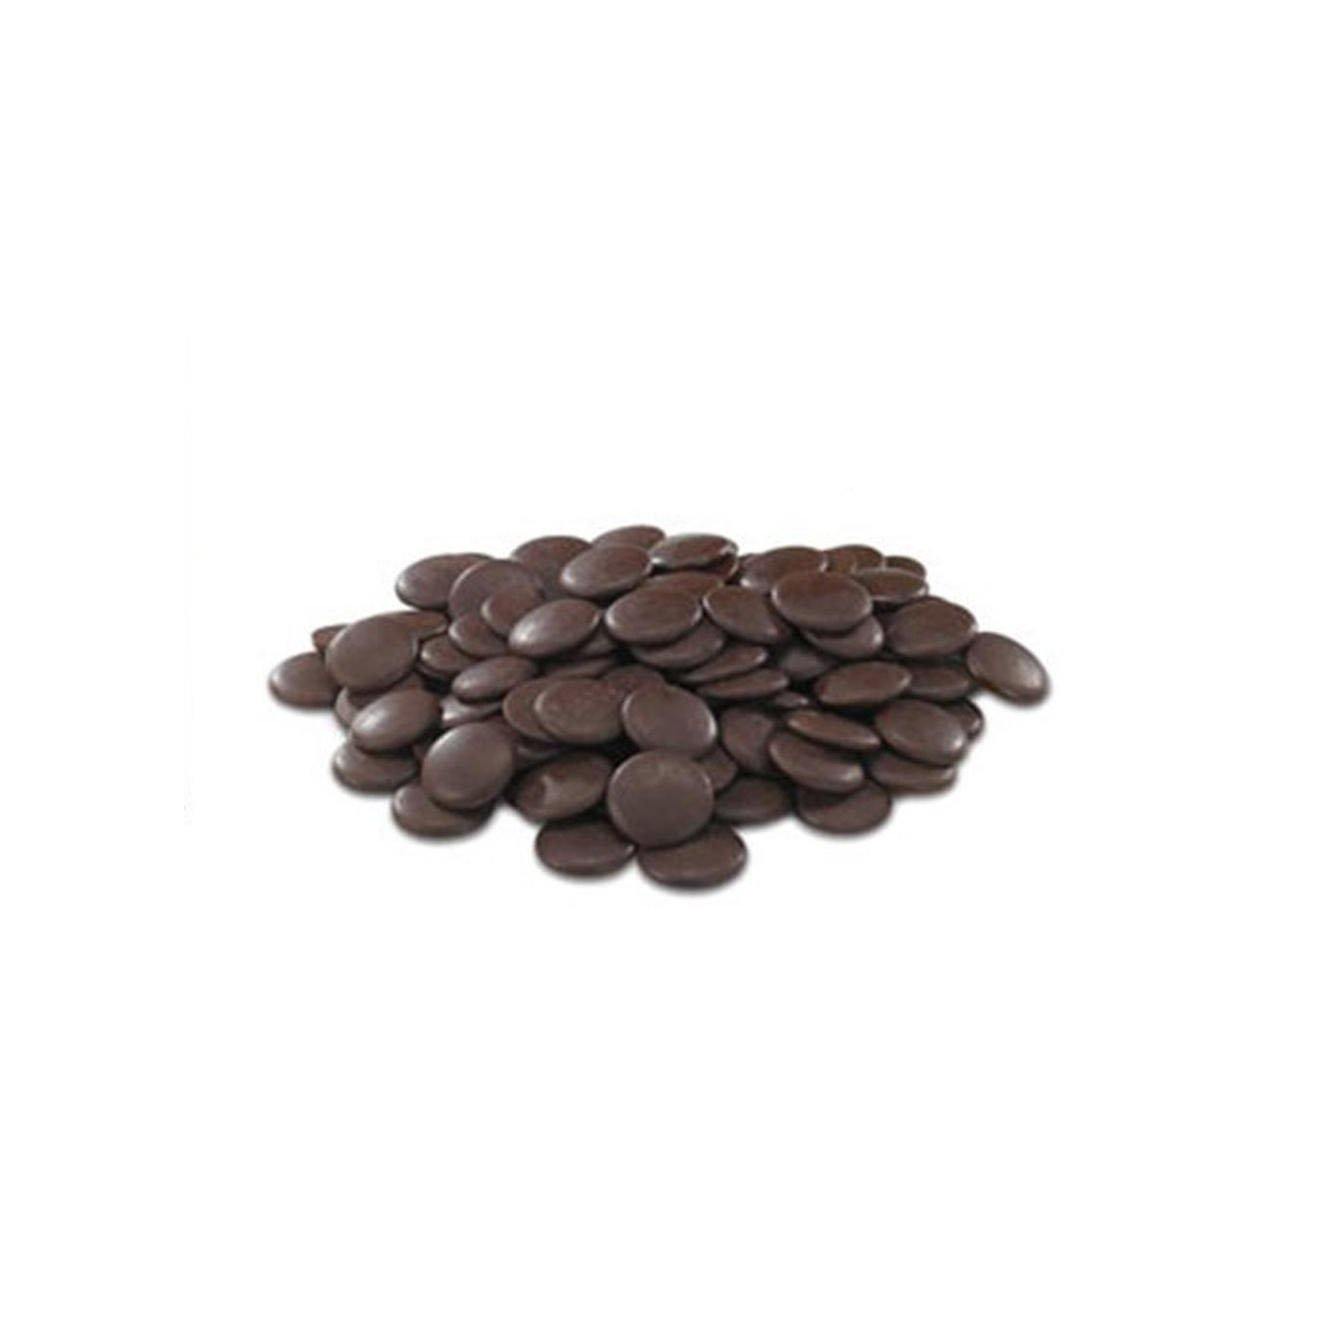 CACAO BARRY Inaya 65%, Dark Chocolate Couverture